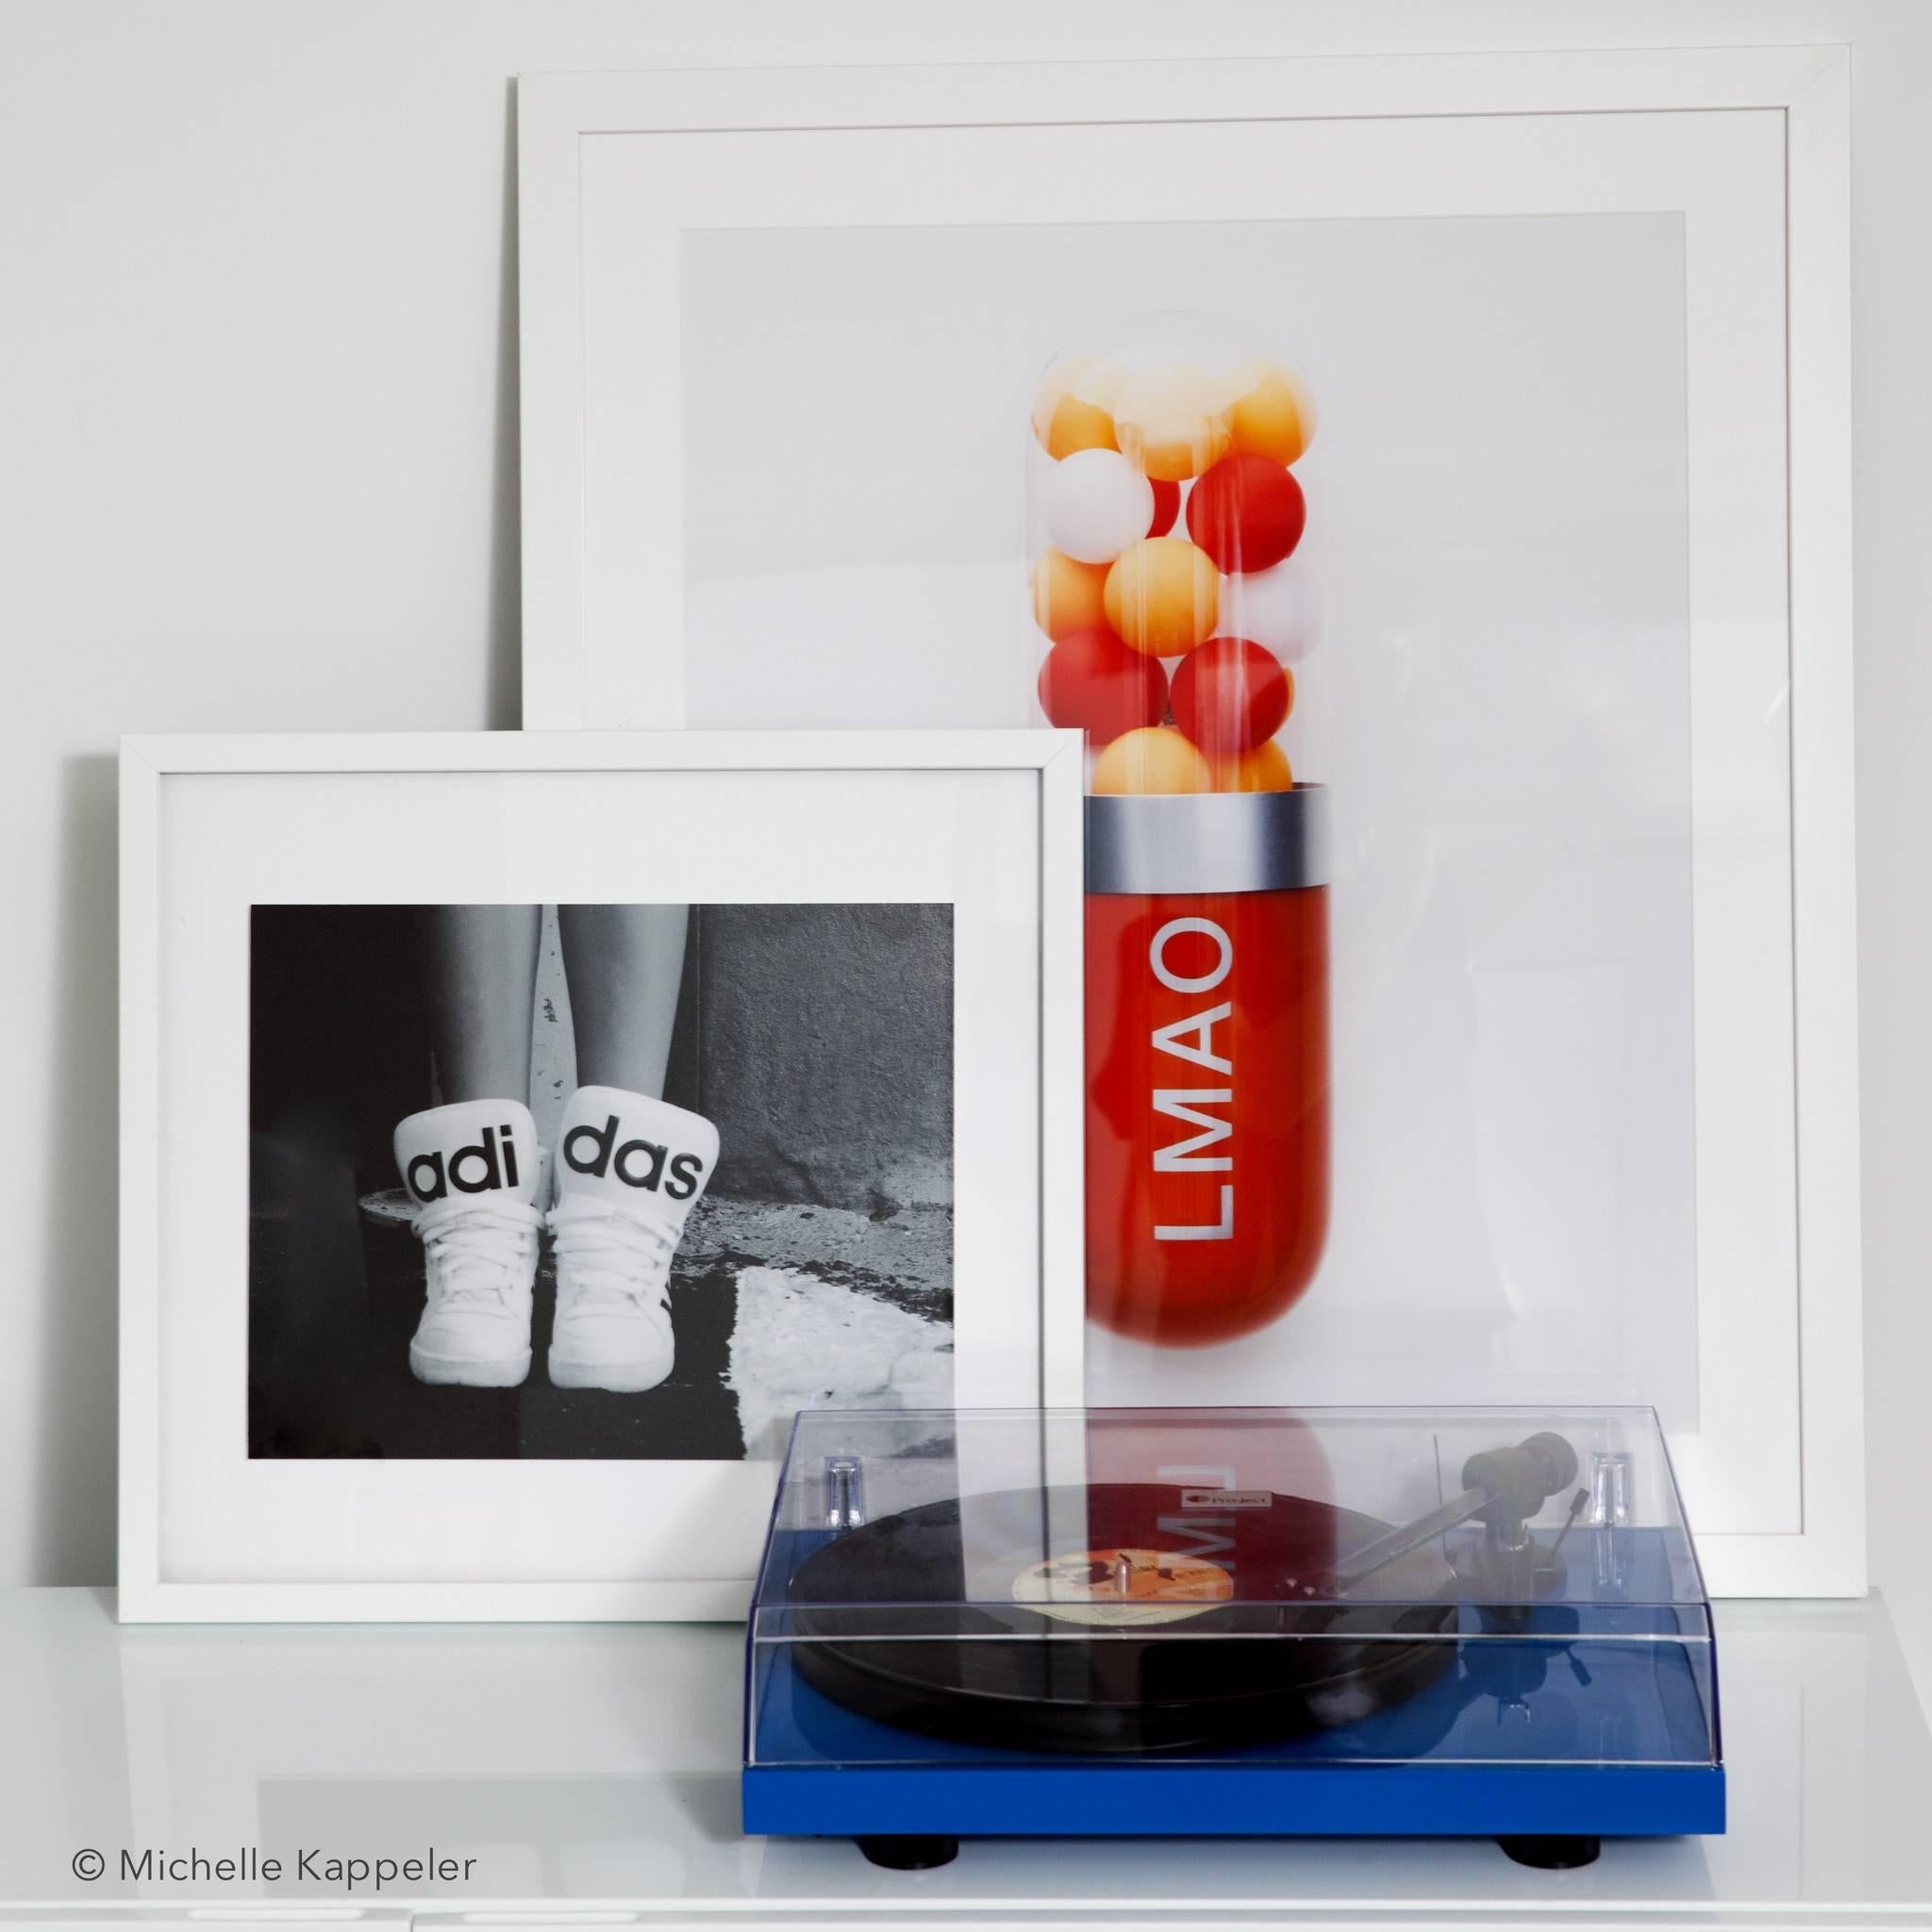 BLTC: LMAO - Limited Edition Print - Photograph by Edie Nadelhaft